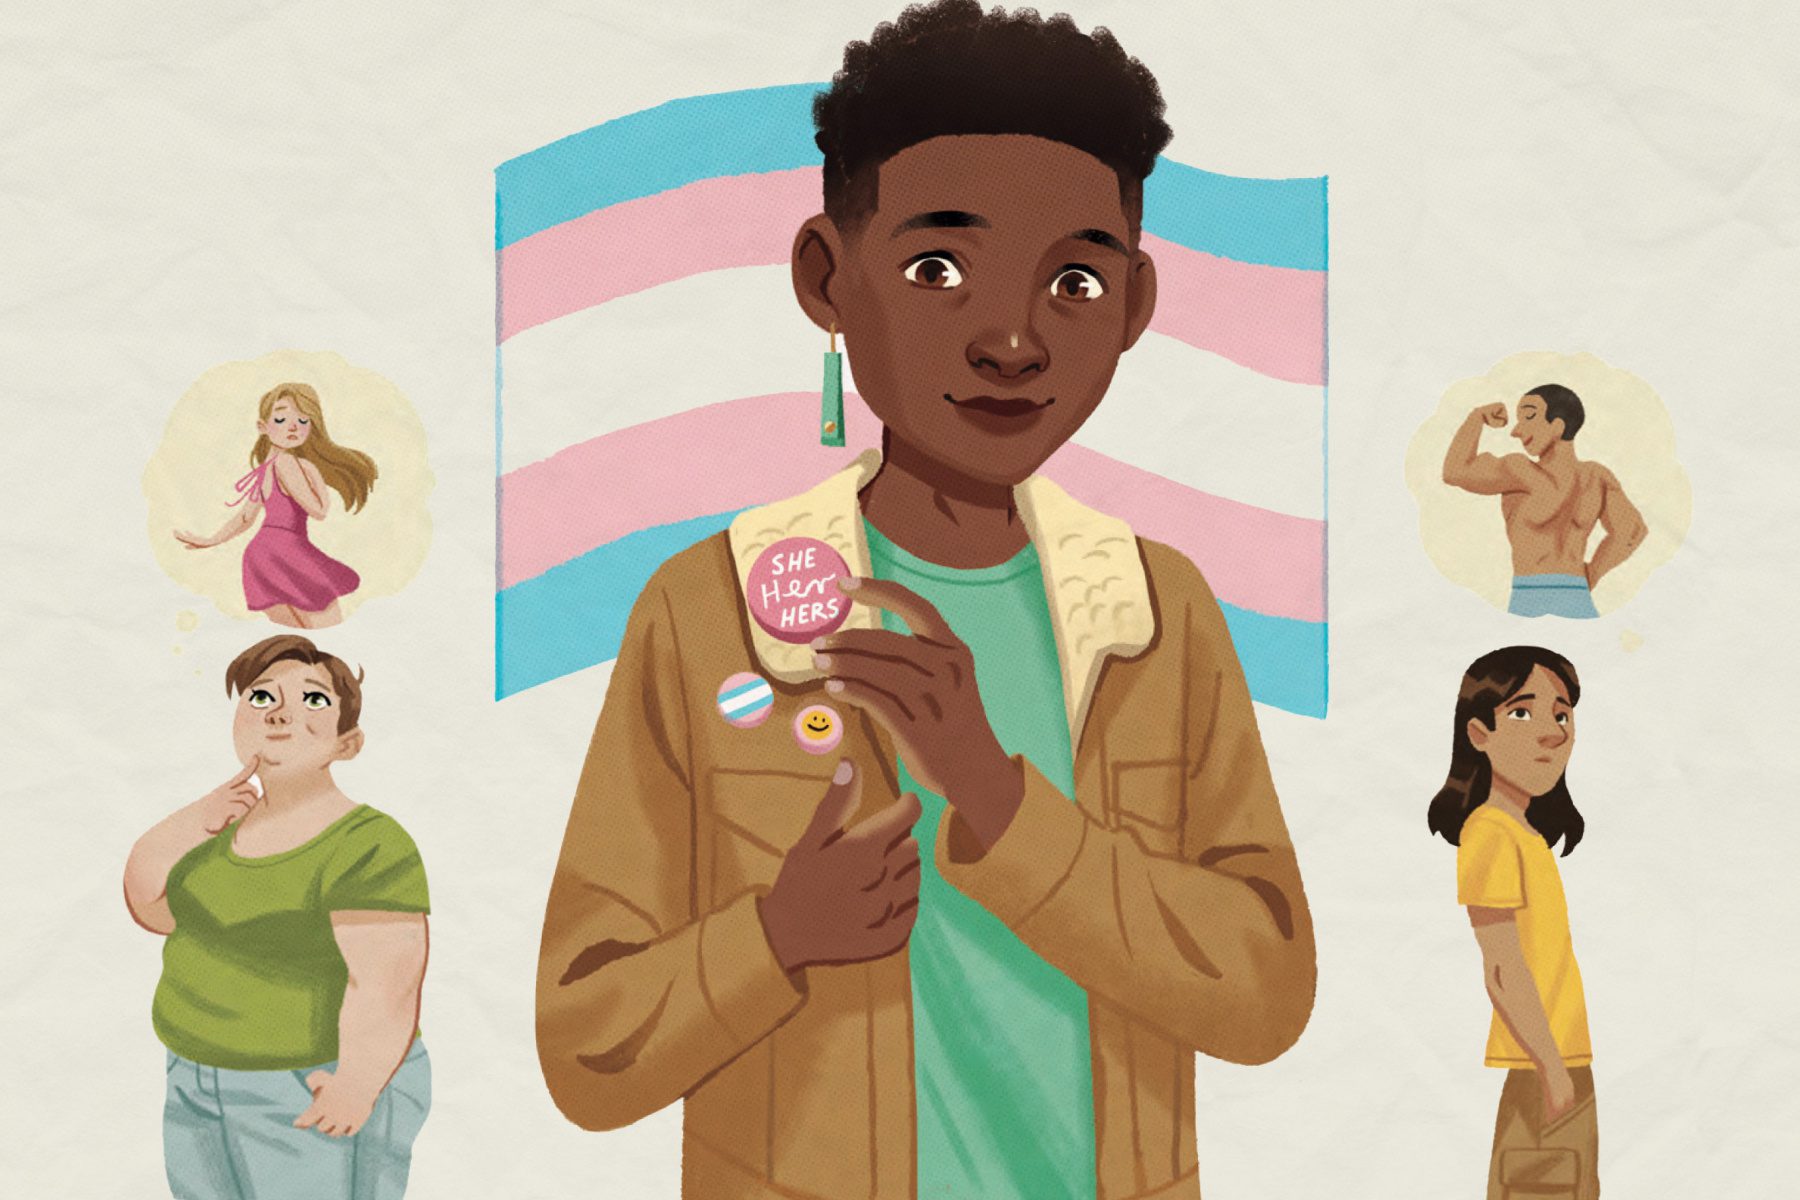 Illustrations from the new American Girl the Smart Girl’s Guide book "Body Image" inluding a trans person wearing a pin with "she, her, hers" pronouns and a trans flag.